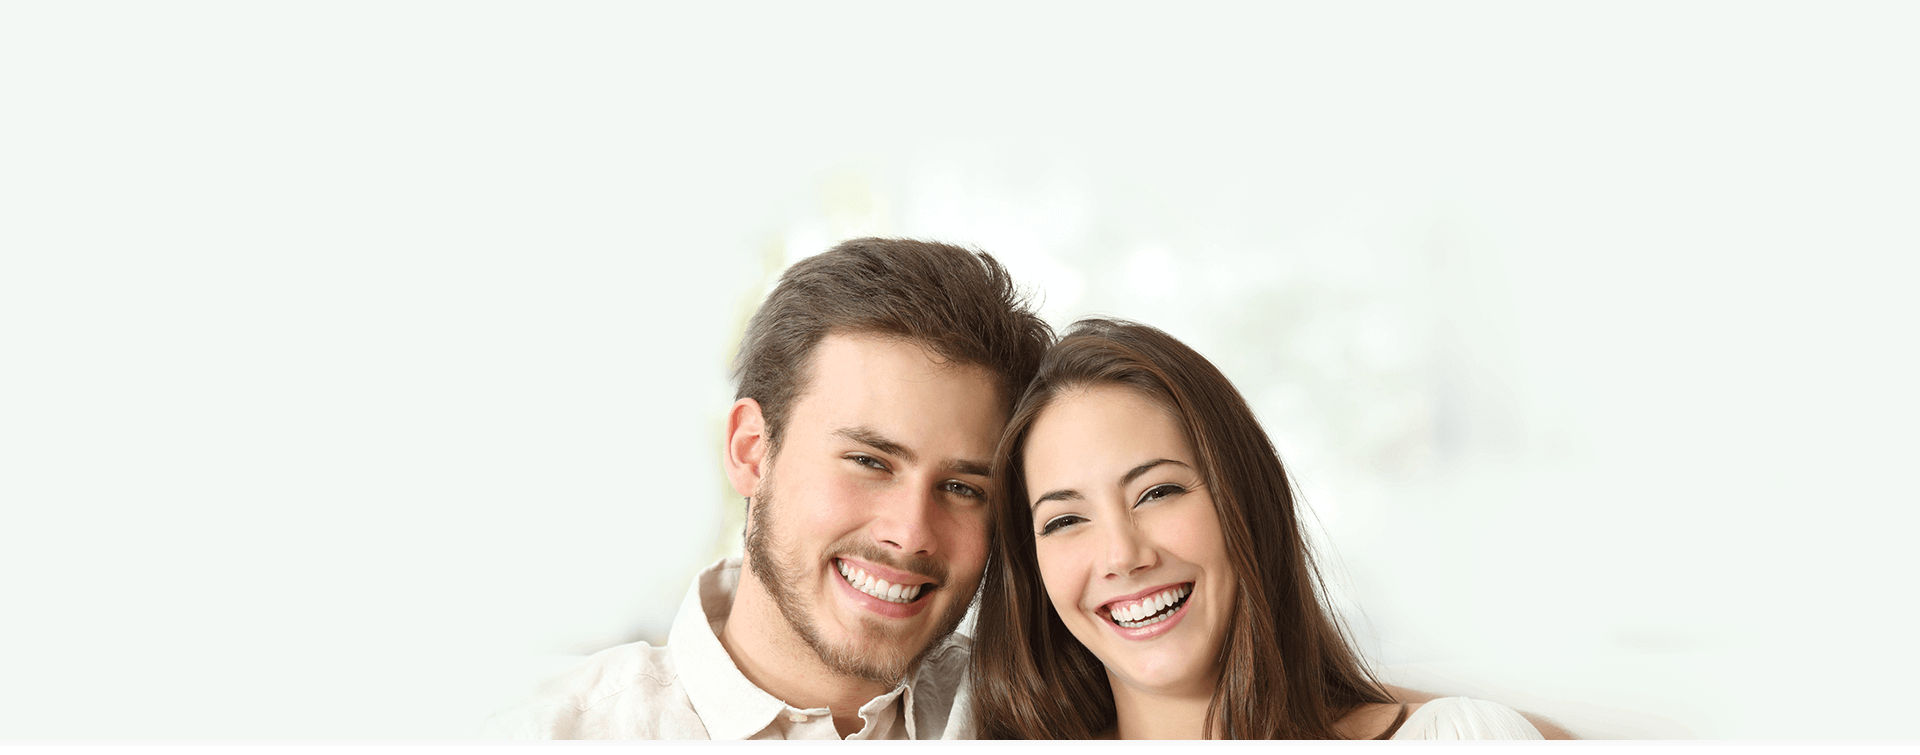 Smiling Young Couple about the dental procedures